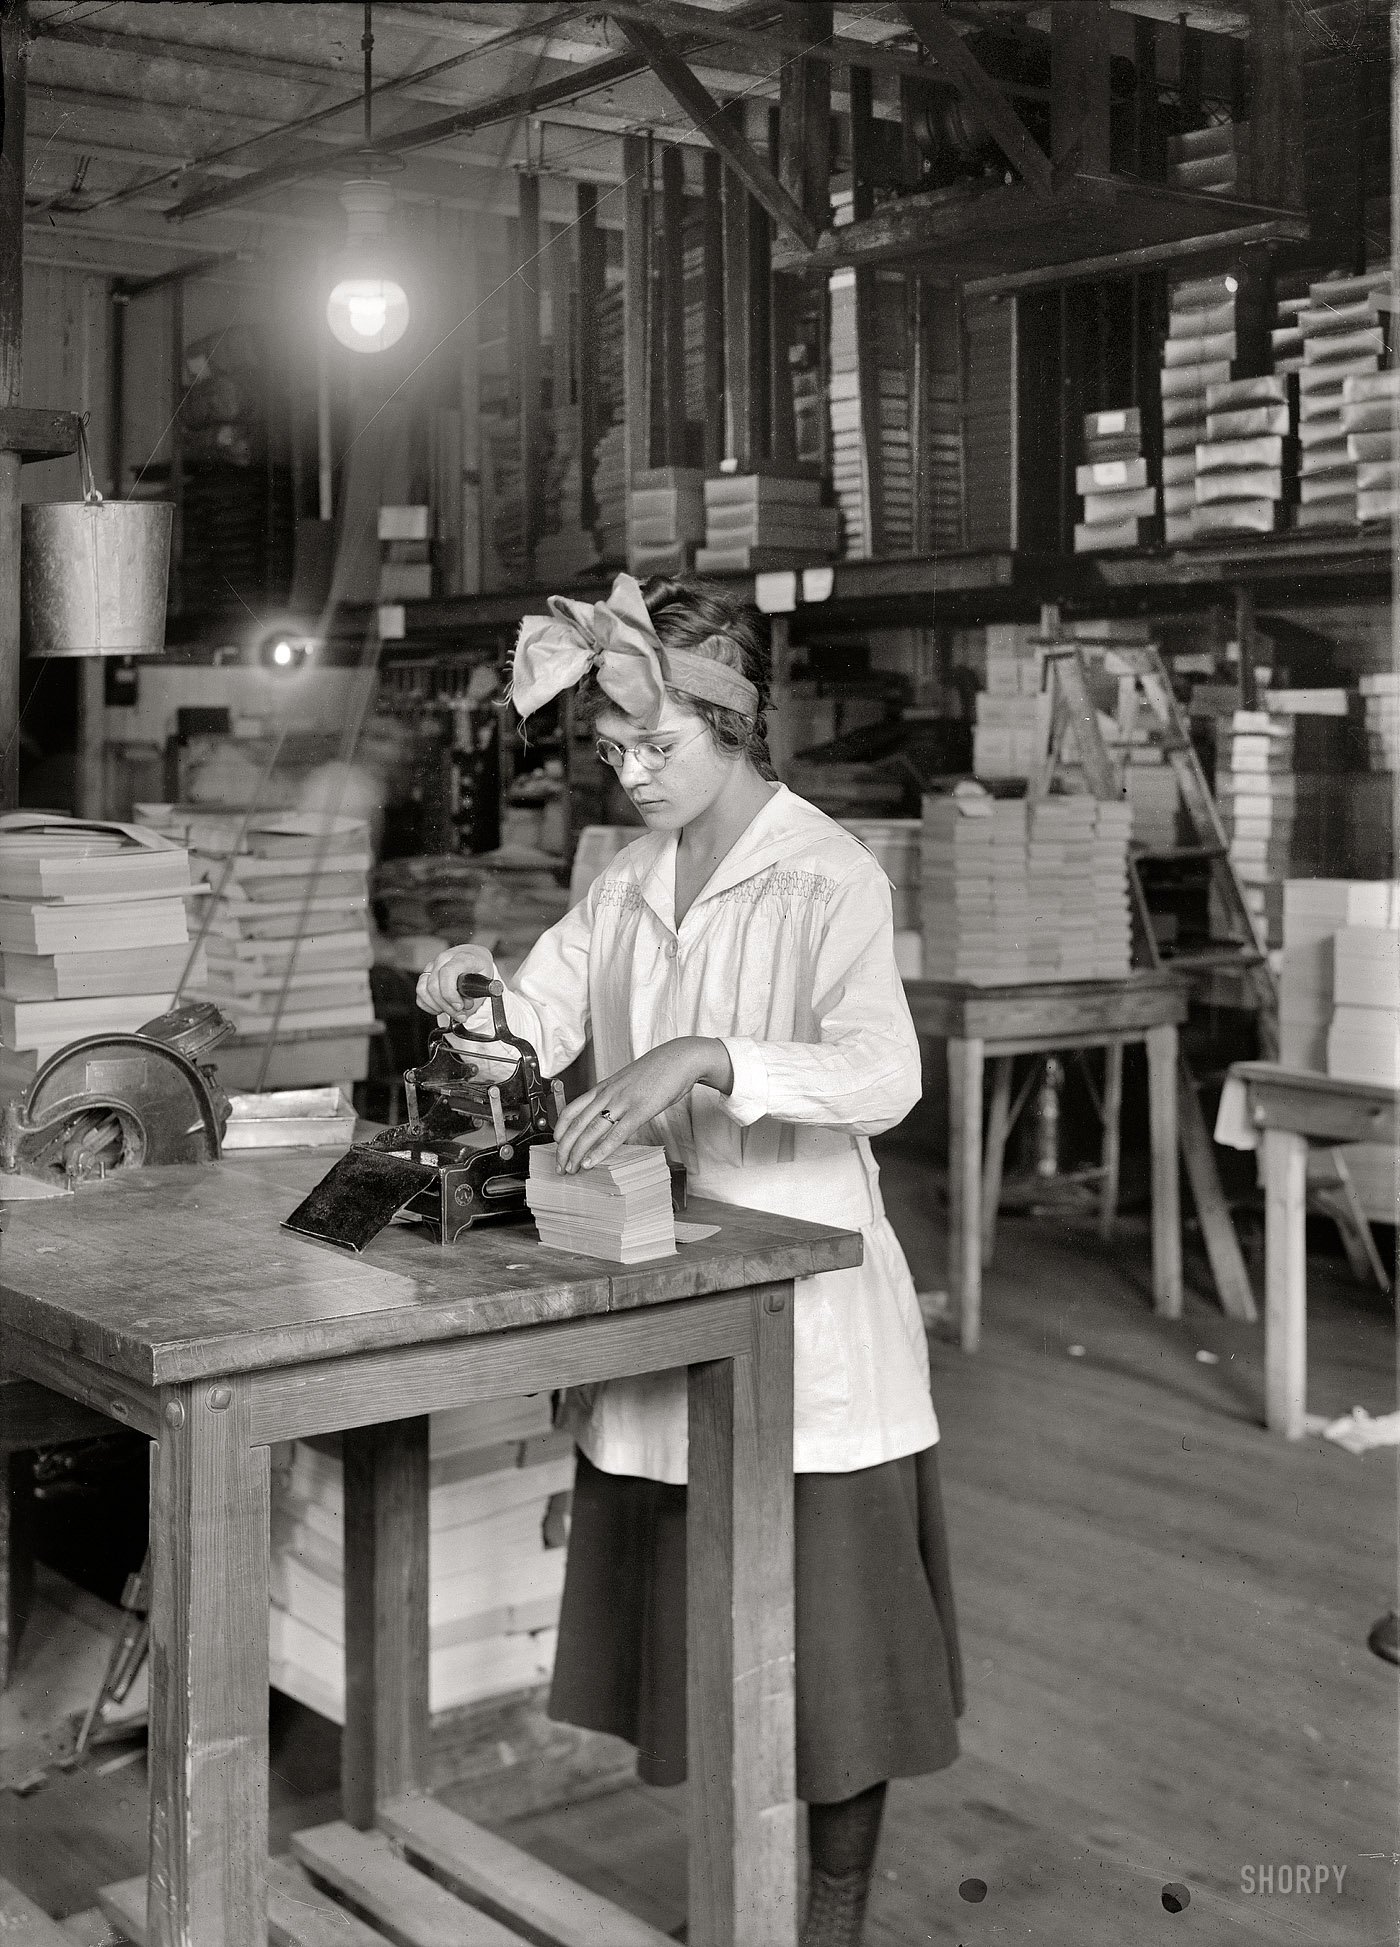 January 31, 1917. "Stamping labels. Boston Index Card Co., 113 Purchase Street." Photograph and caption by Lewis Wickes Hine. View full size.